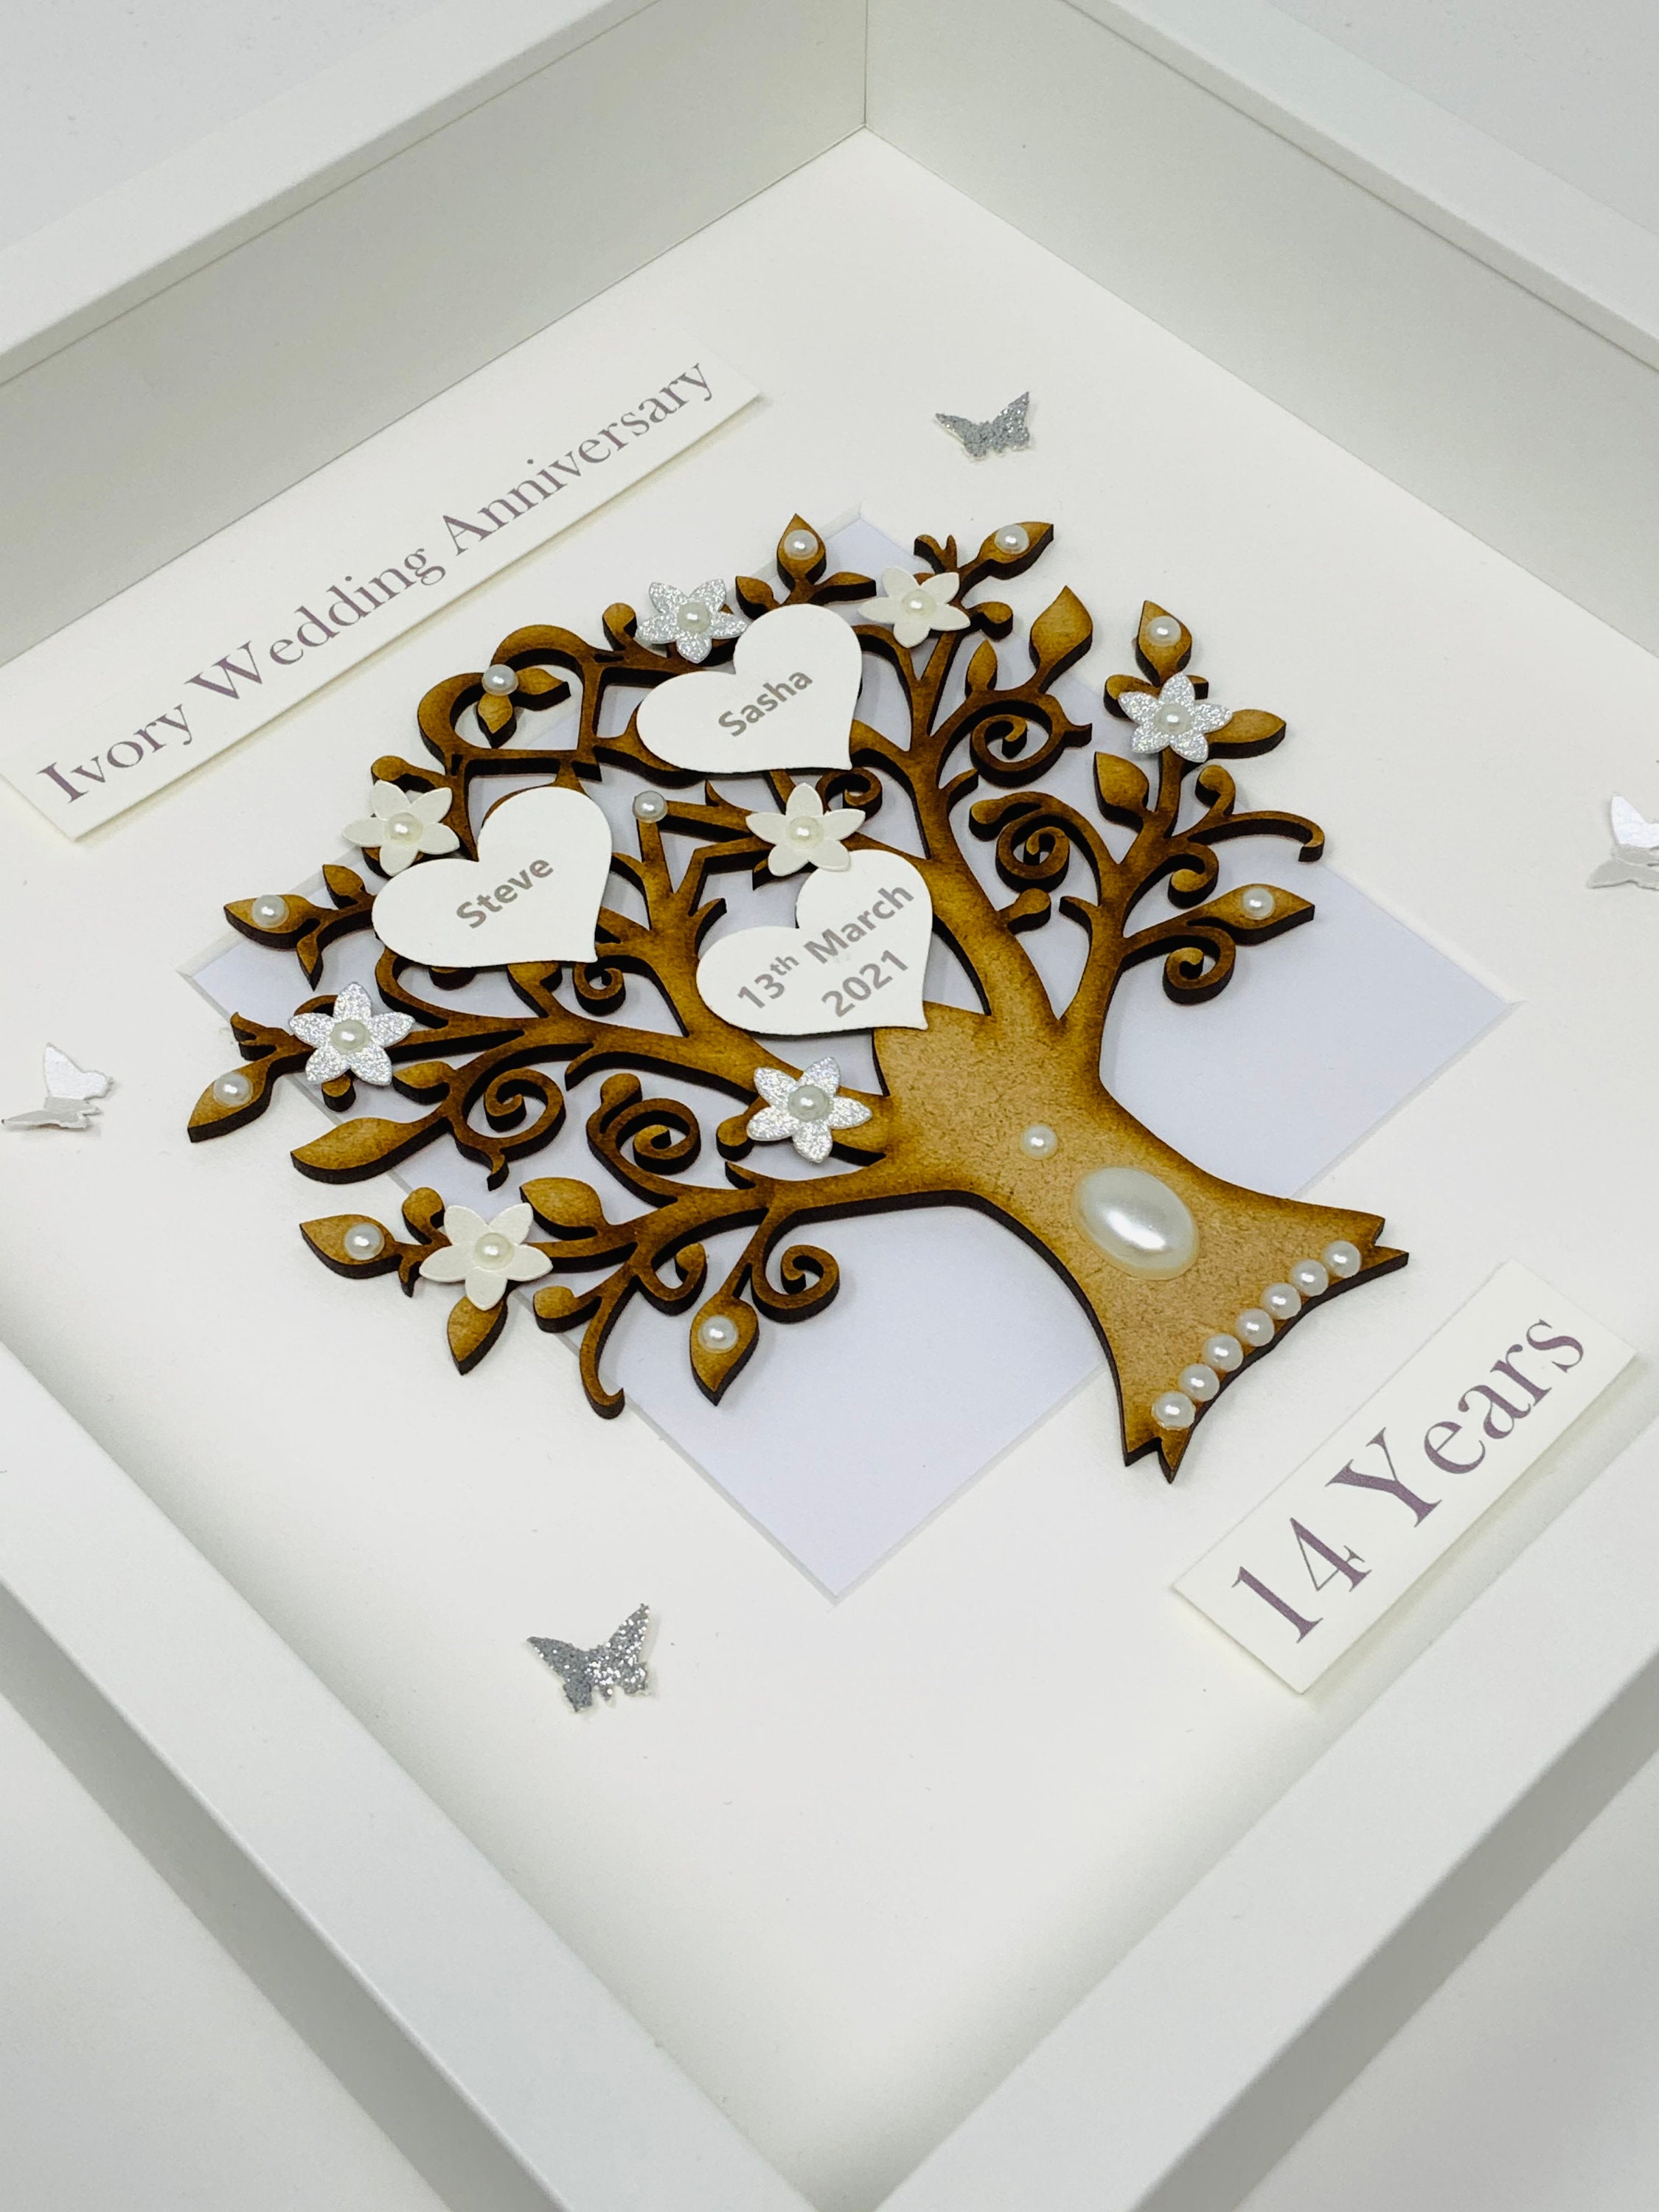 Personalized Wedding Gift, Couple Heads – Inspiral Tree